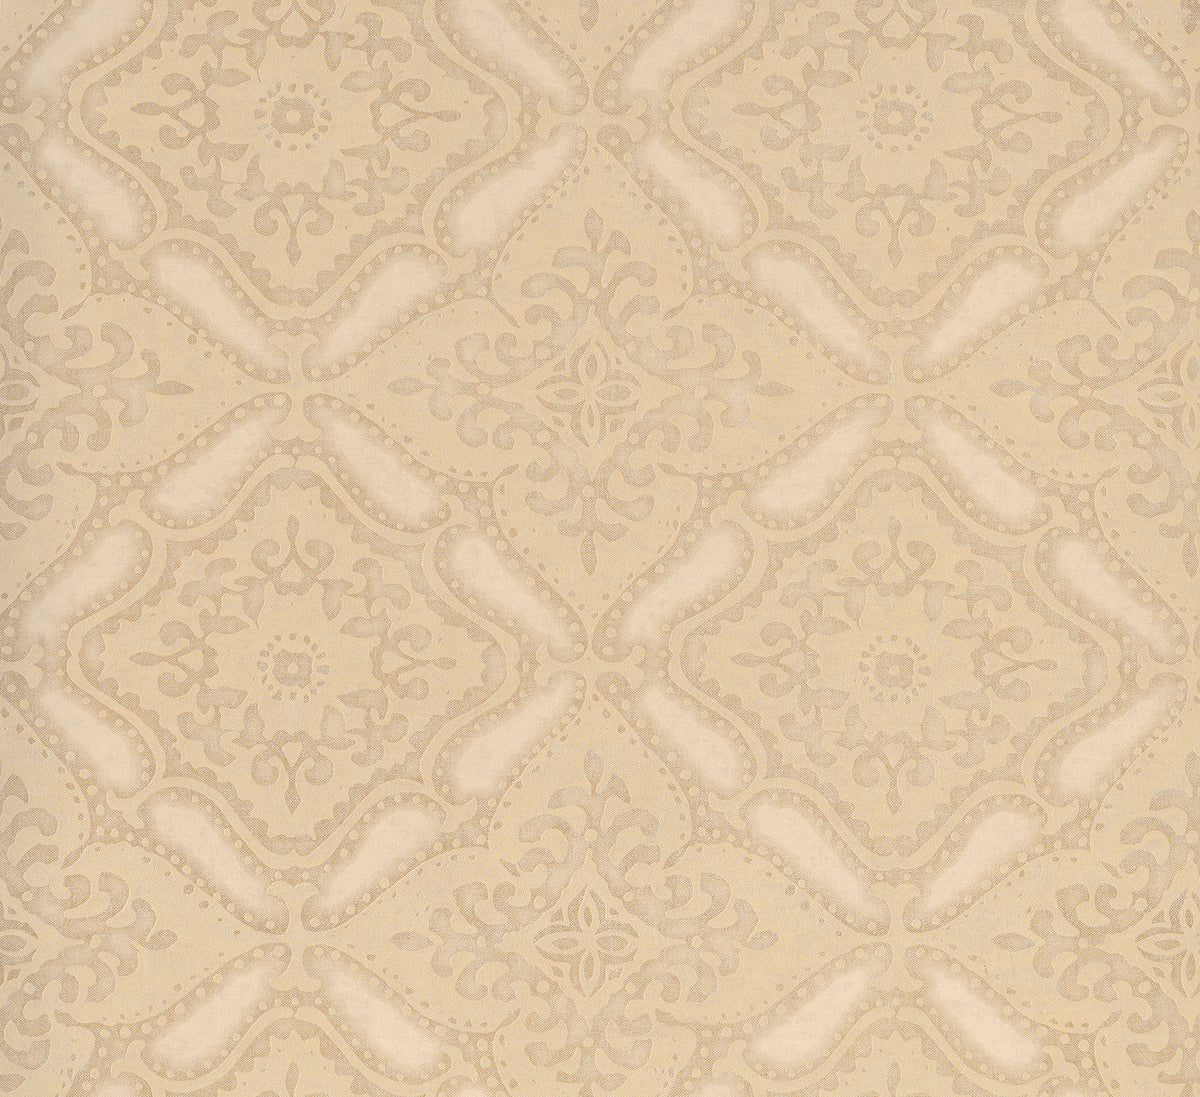 Damask Traditional Classic Floral Vintage Beige and White R4462